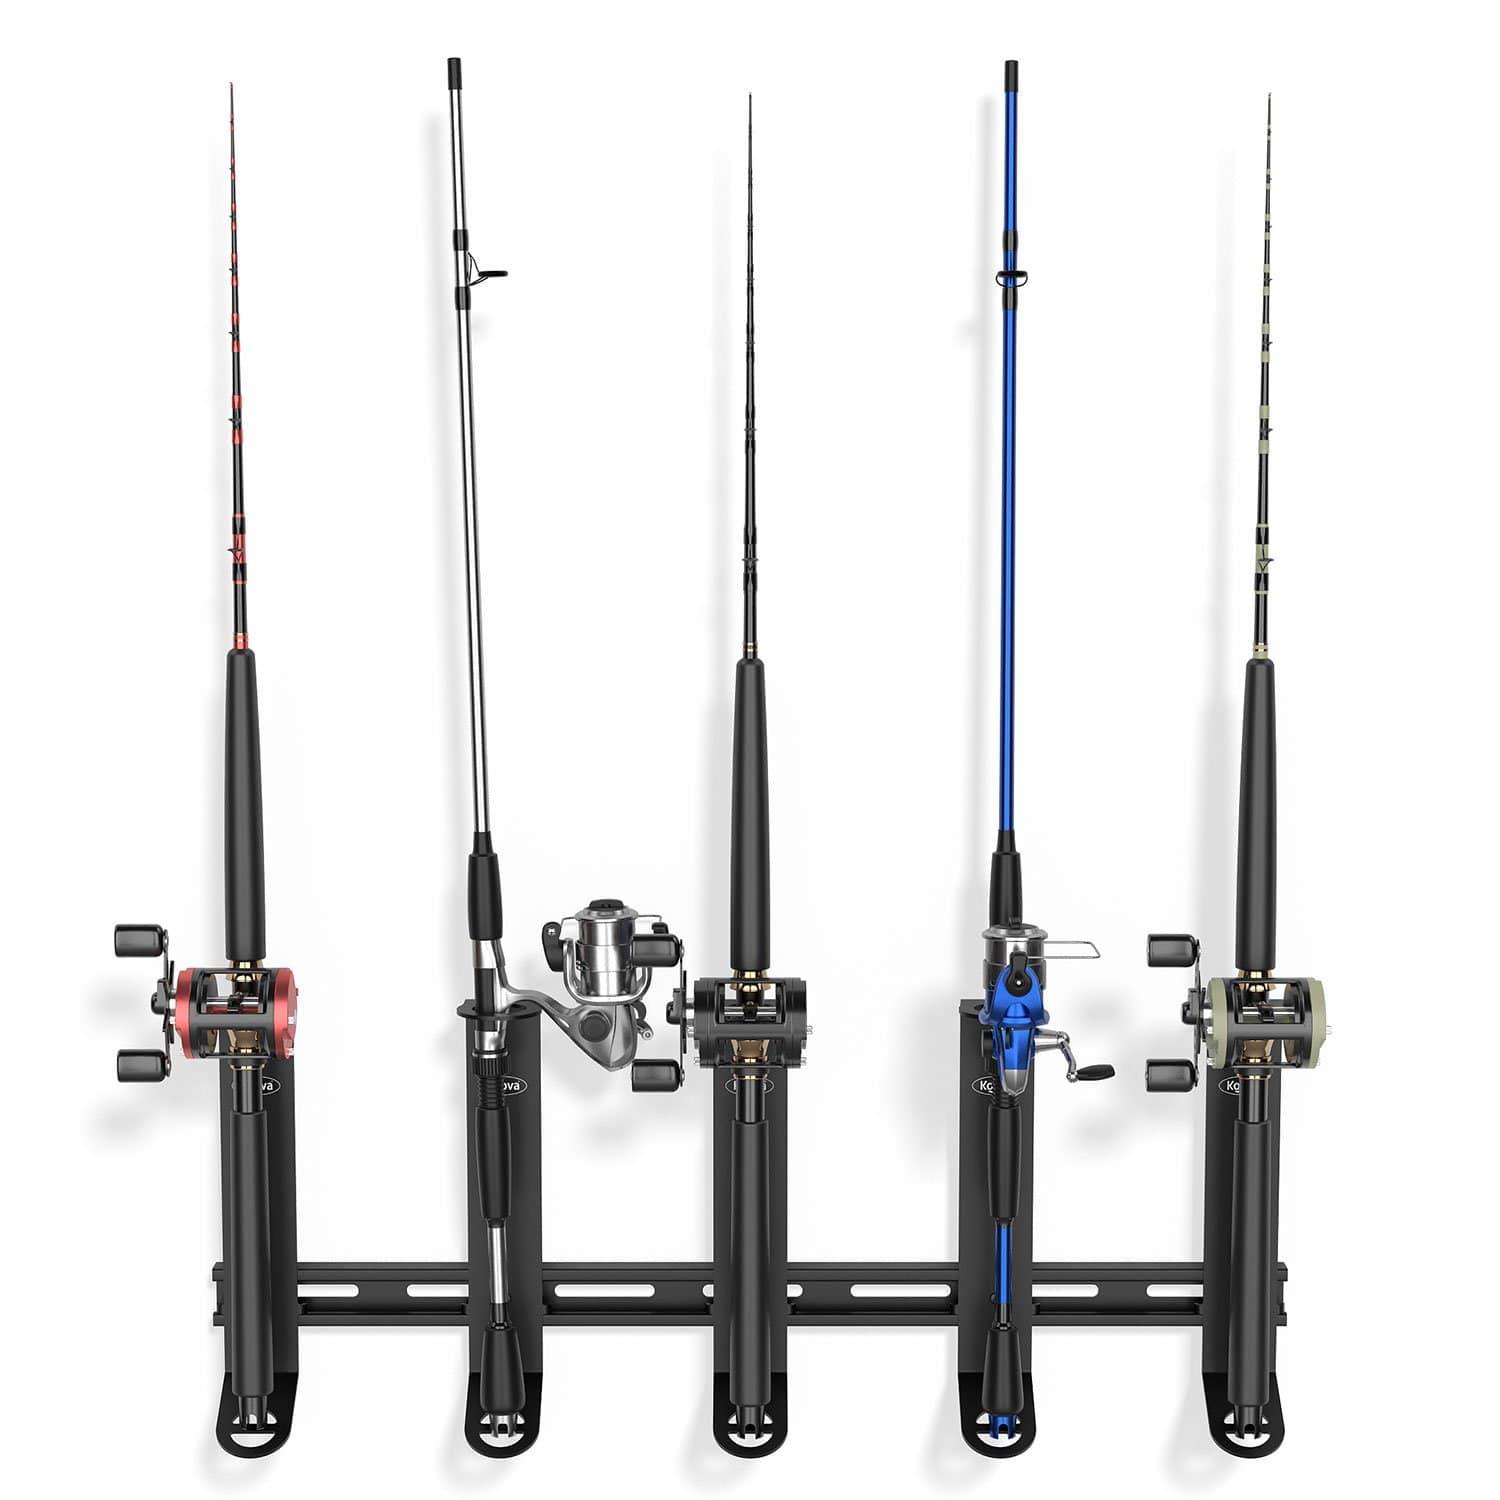 KSWLOR Fishing Rod Holder Wall Mount Rod Holders for Fishing,Fishing Pole  Wall Storage Rack,Fishing Rod Rack Storage Wall Mount for Garage,Cabin and  Basement,Holds 8 Fishing Rods : : Sports & Outdoors